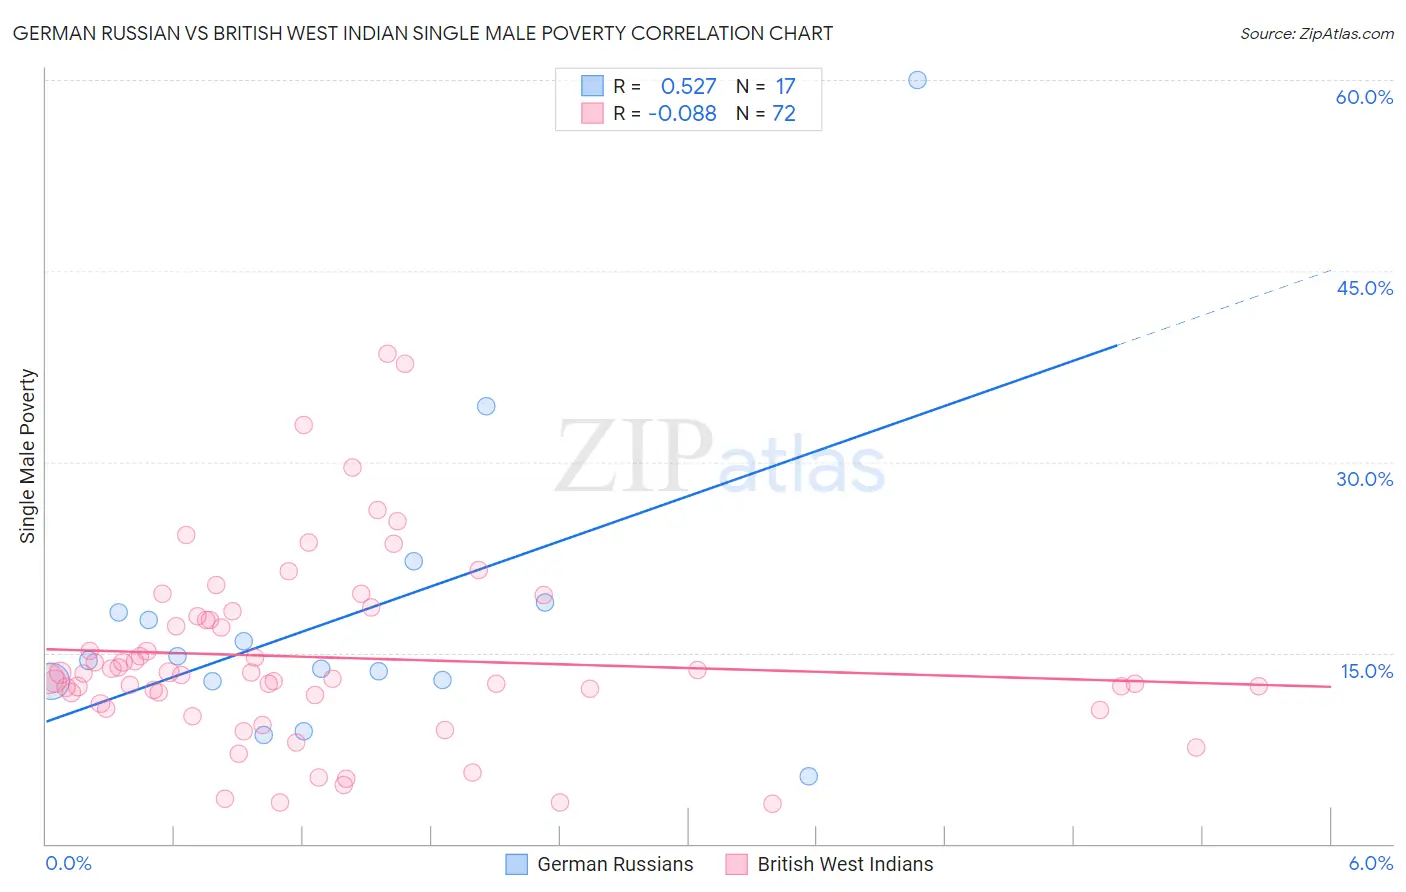 German Russian vs British West Indian Single Male Poverty